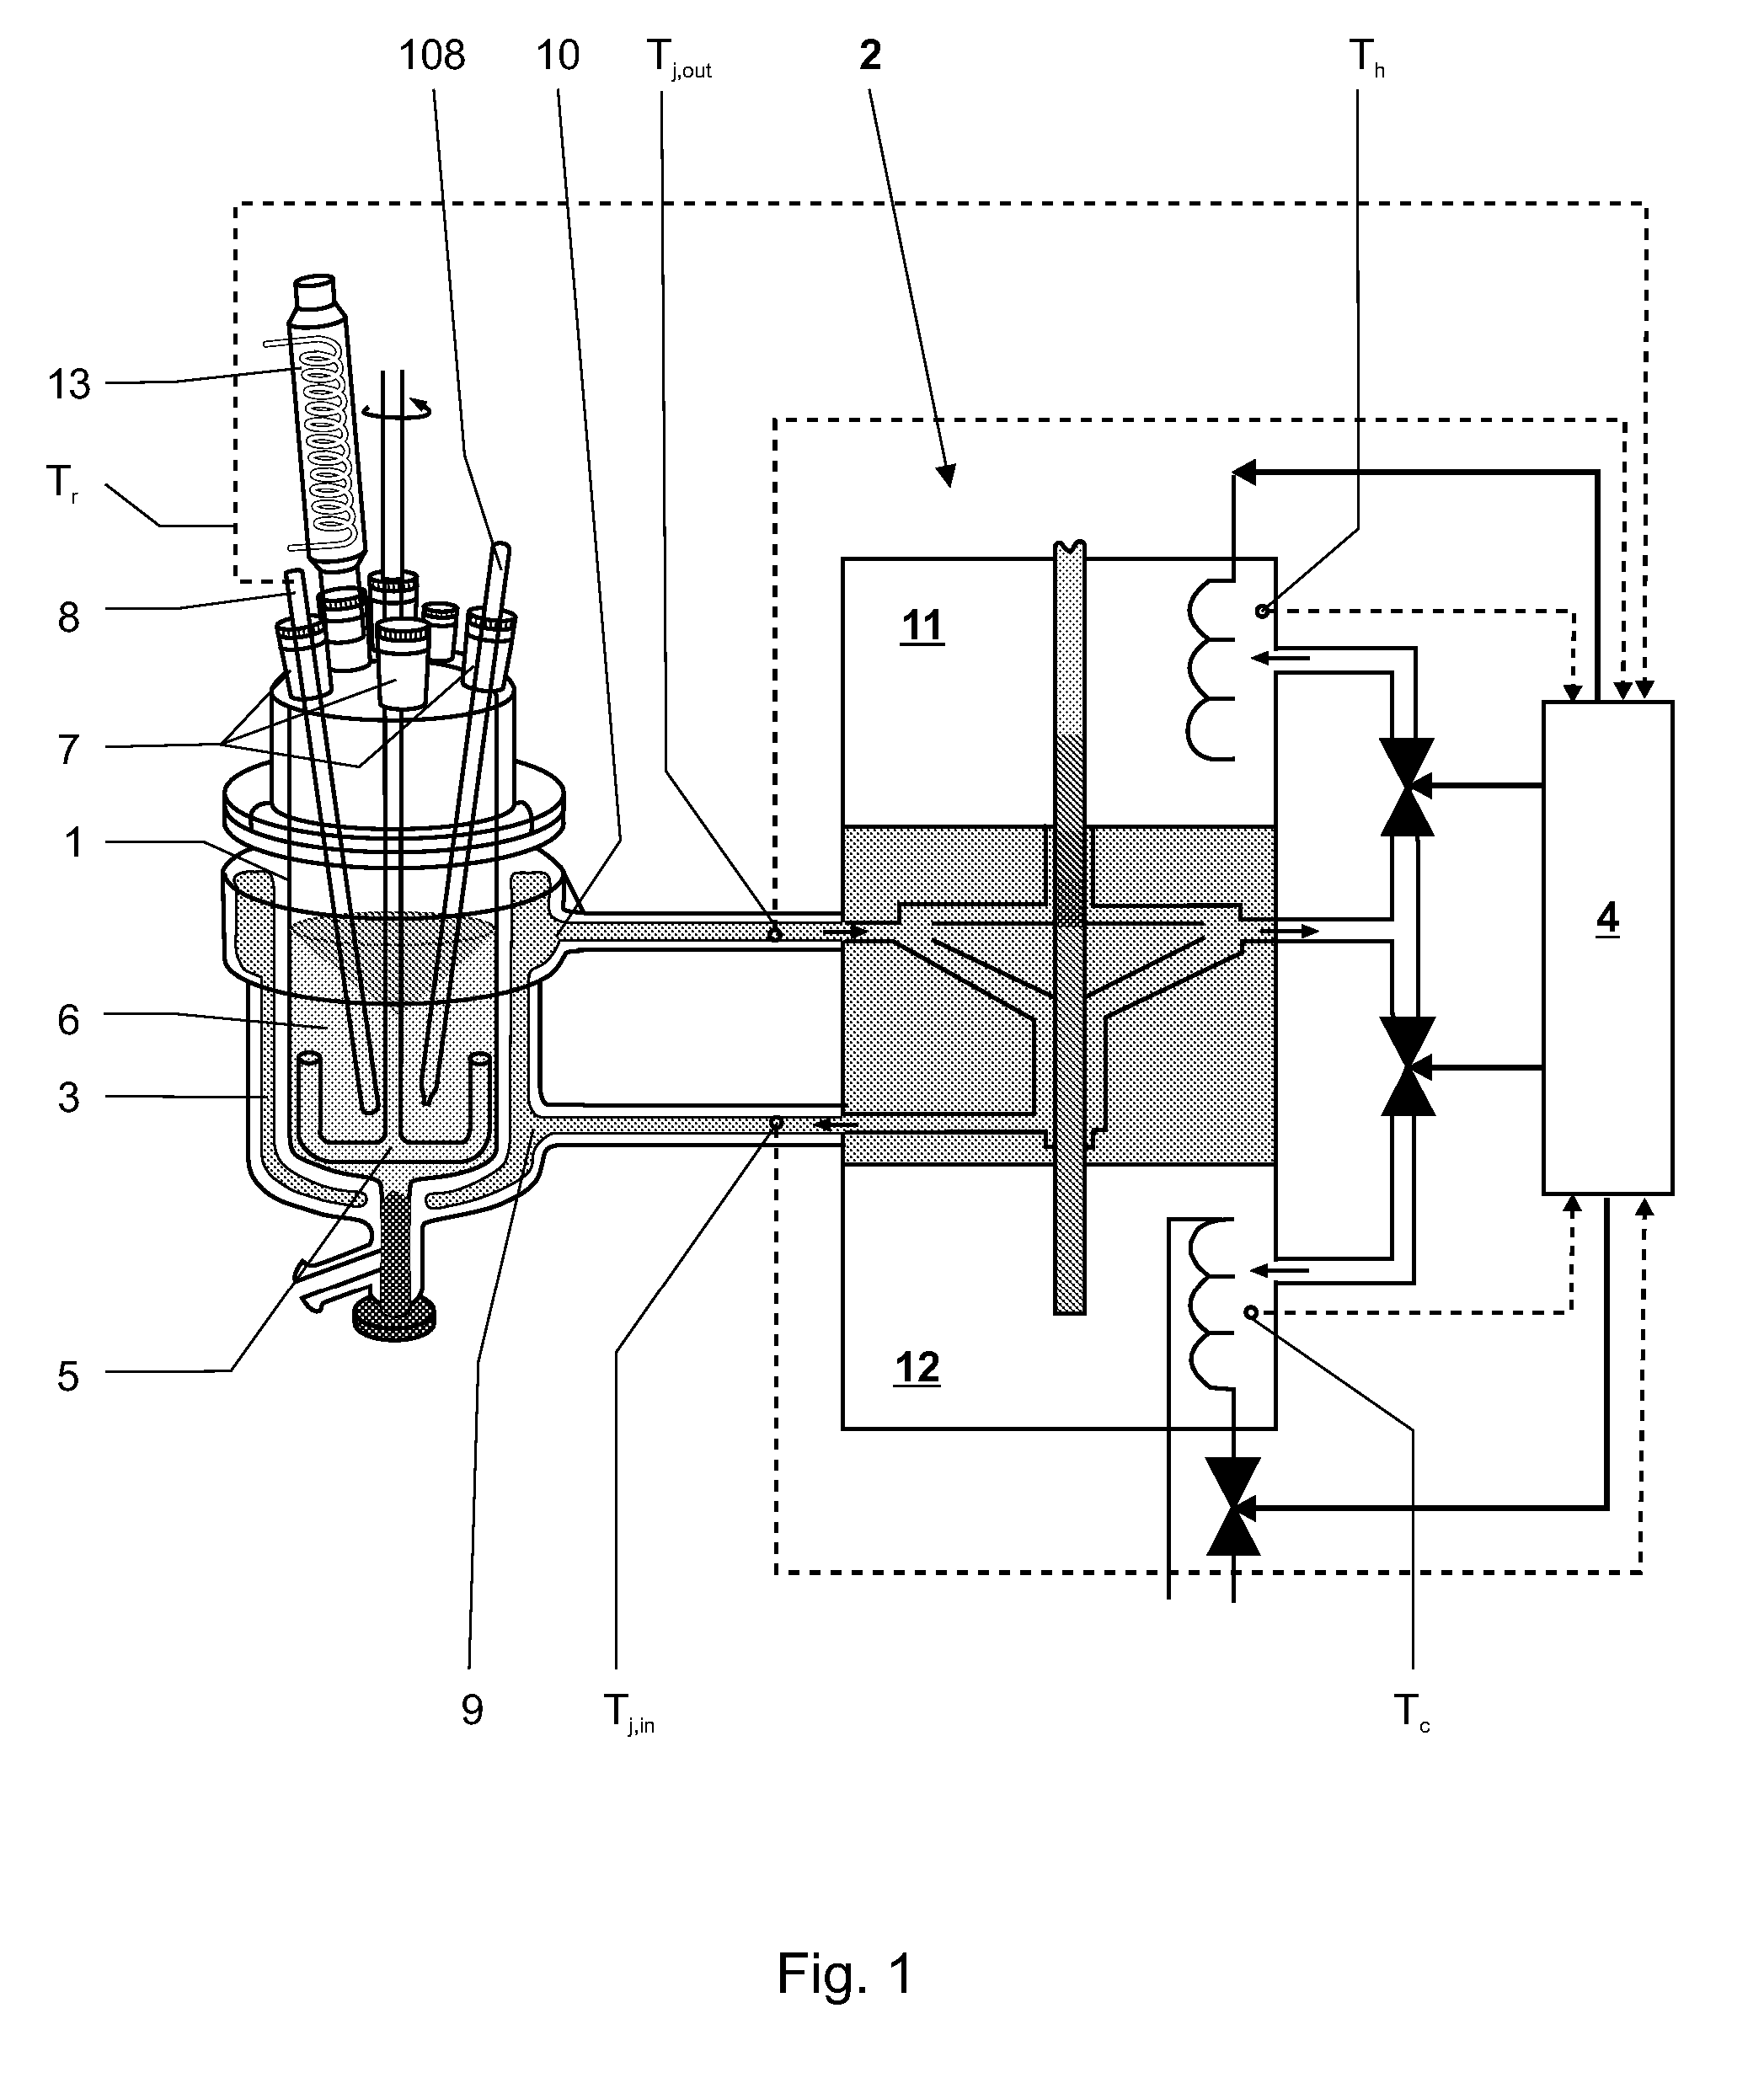 Method for simulating a process plant at laboratory scale